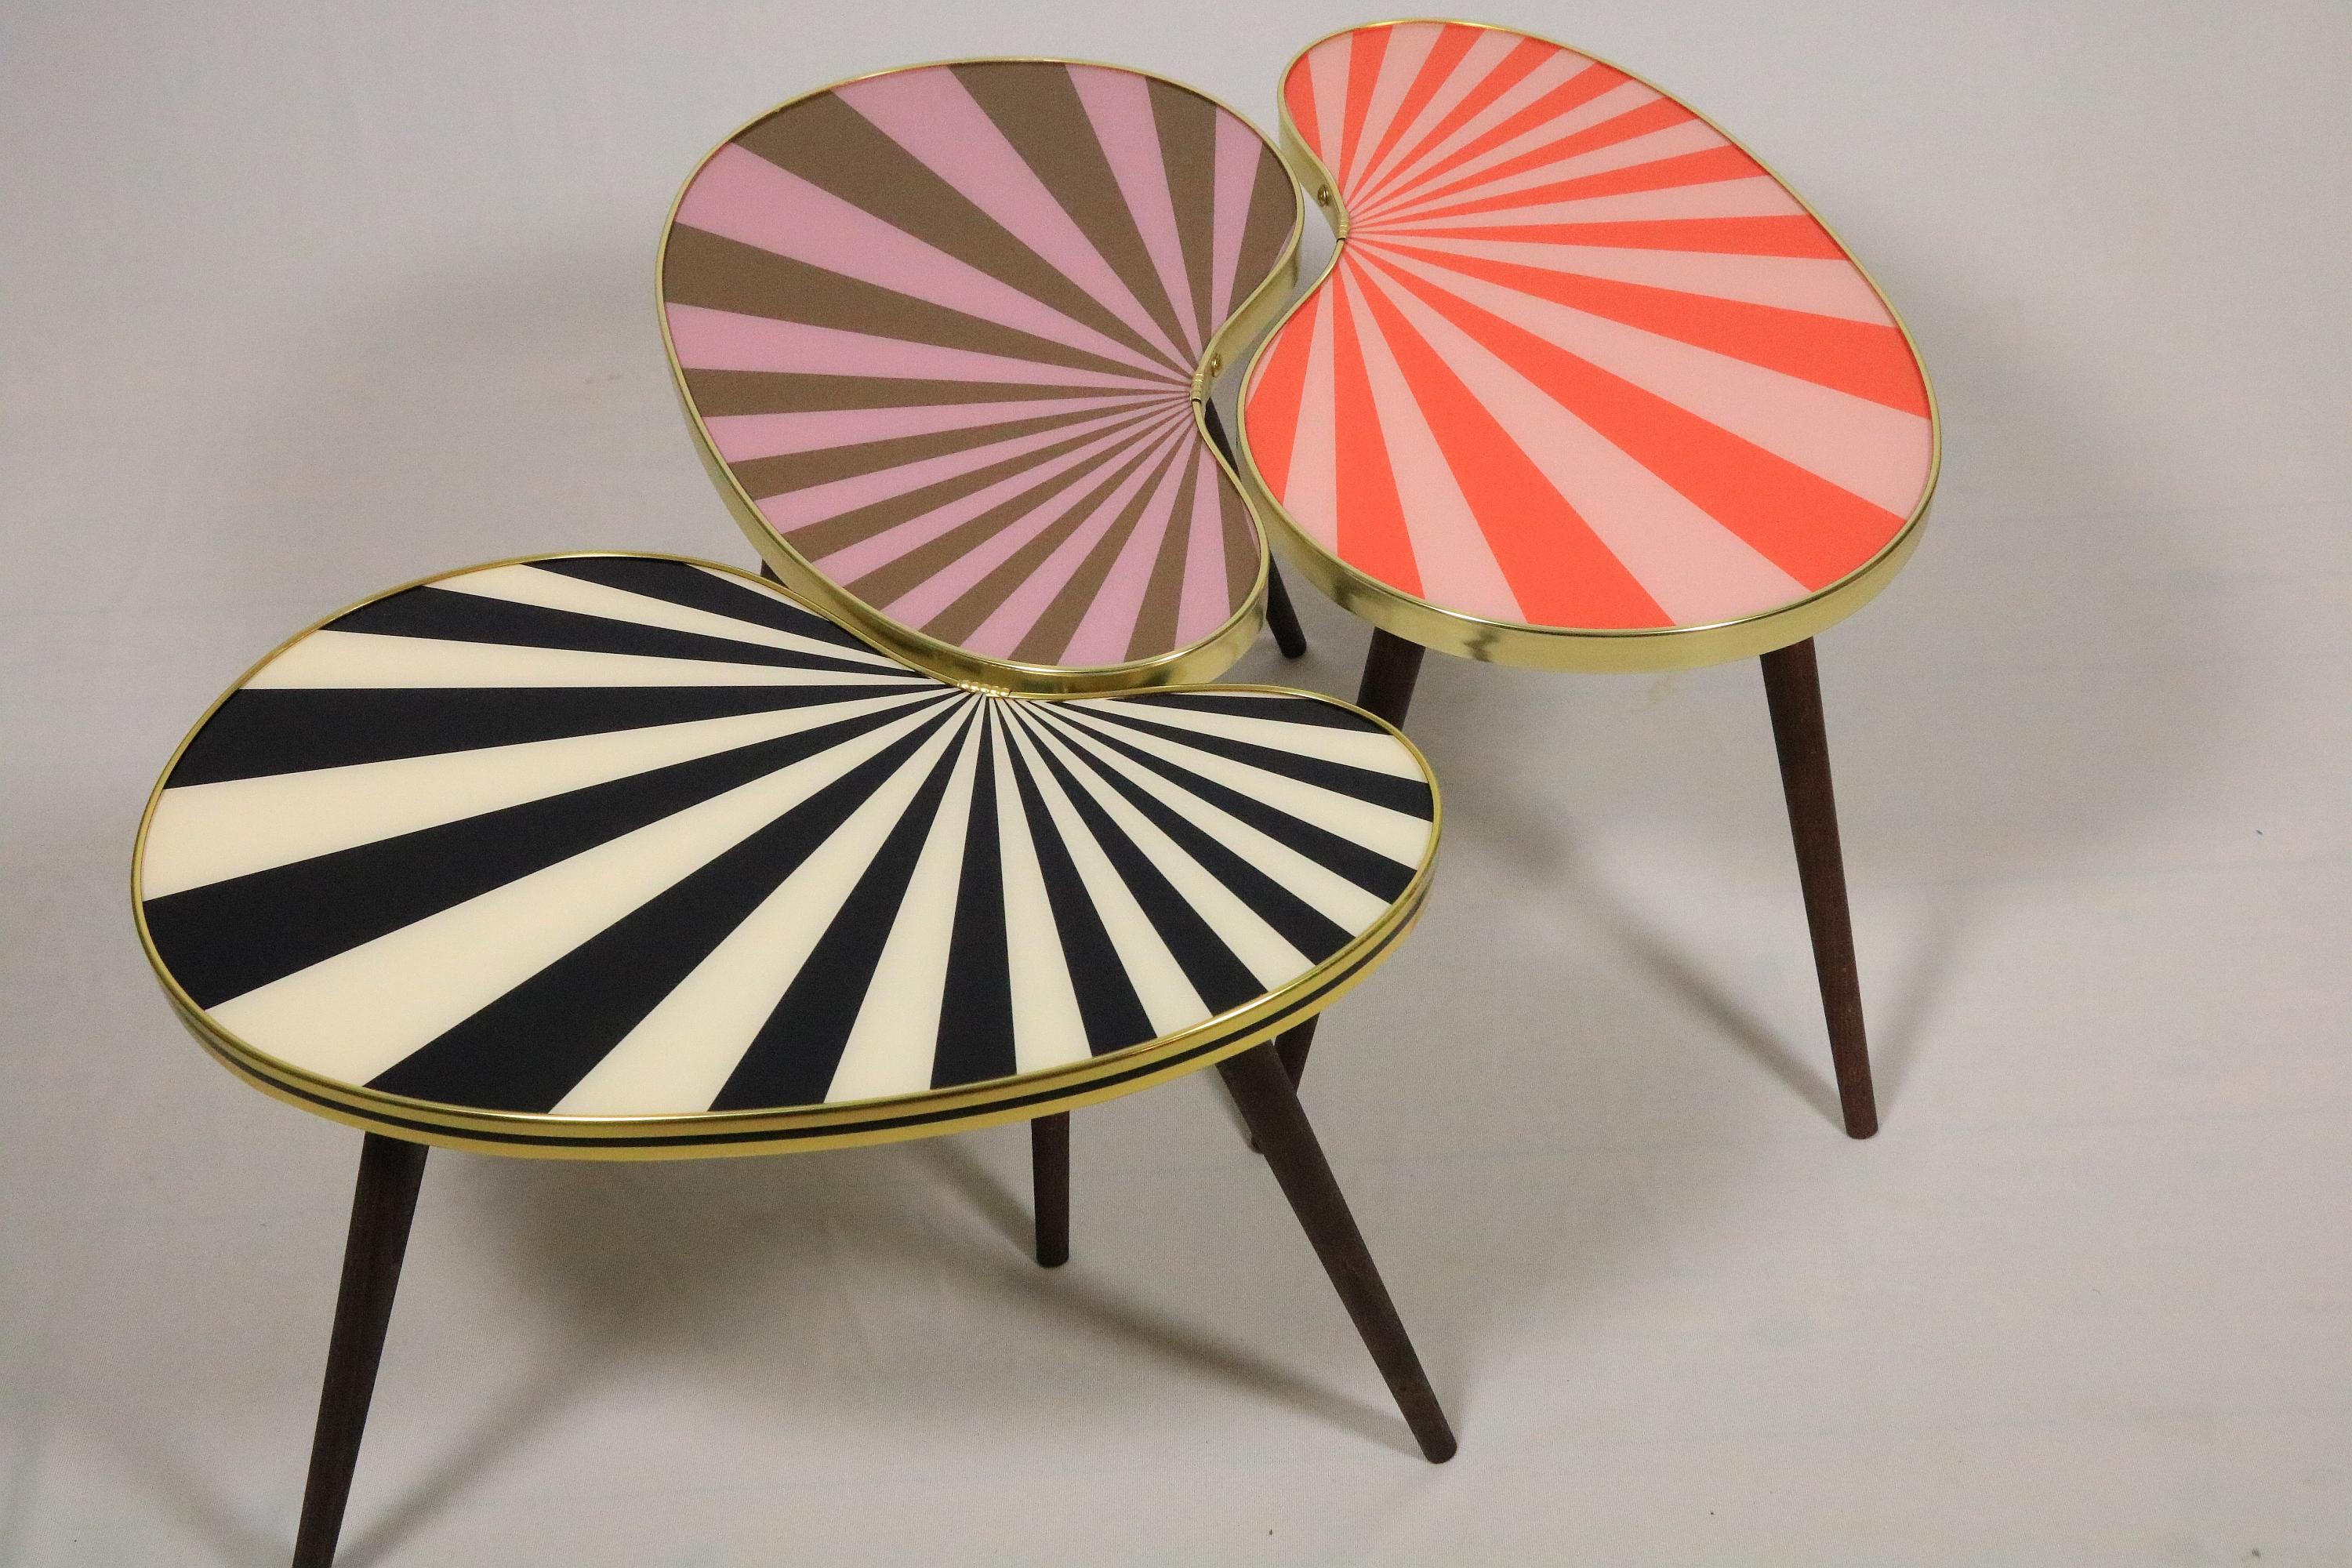 Side Table, Kidney Shaped, Red-Pink Stripes, Three Elegant Legs, 50s Style  2